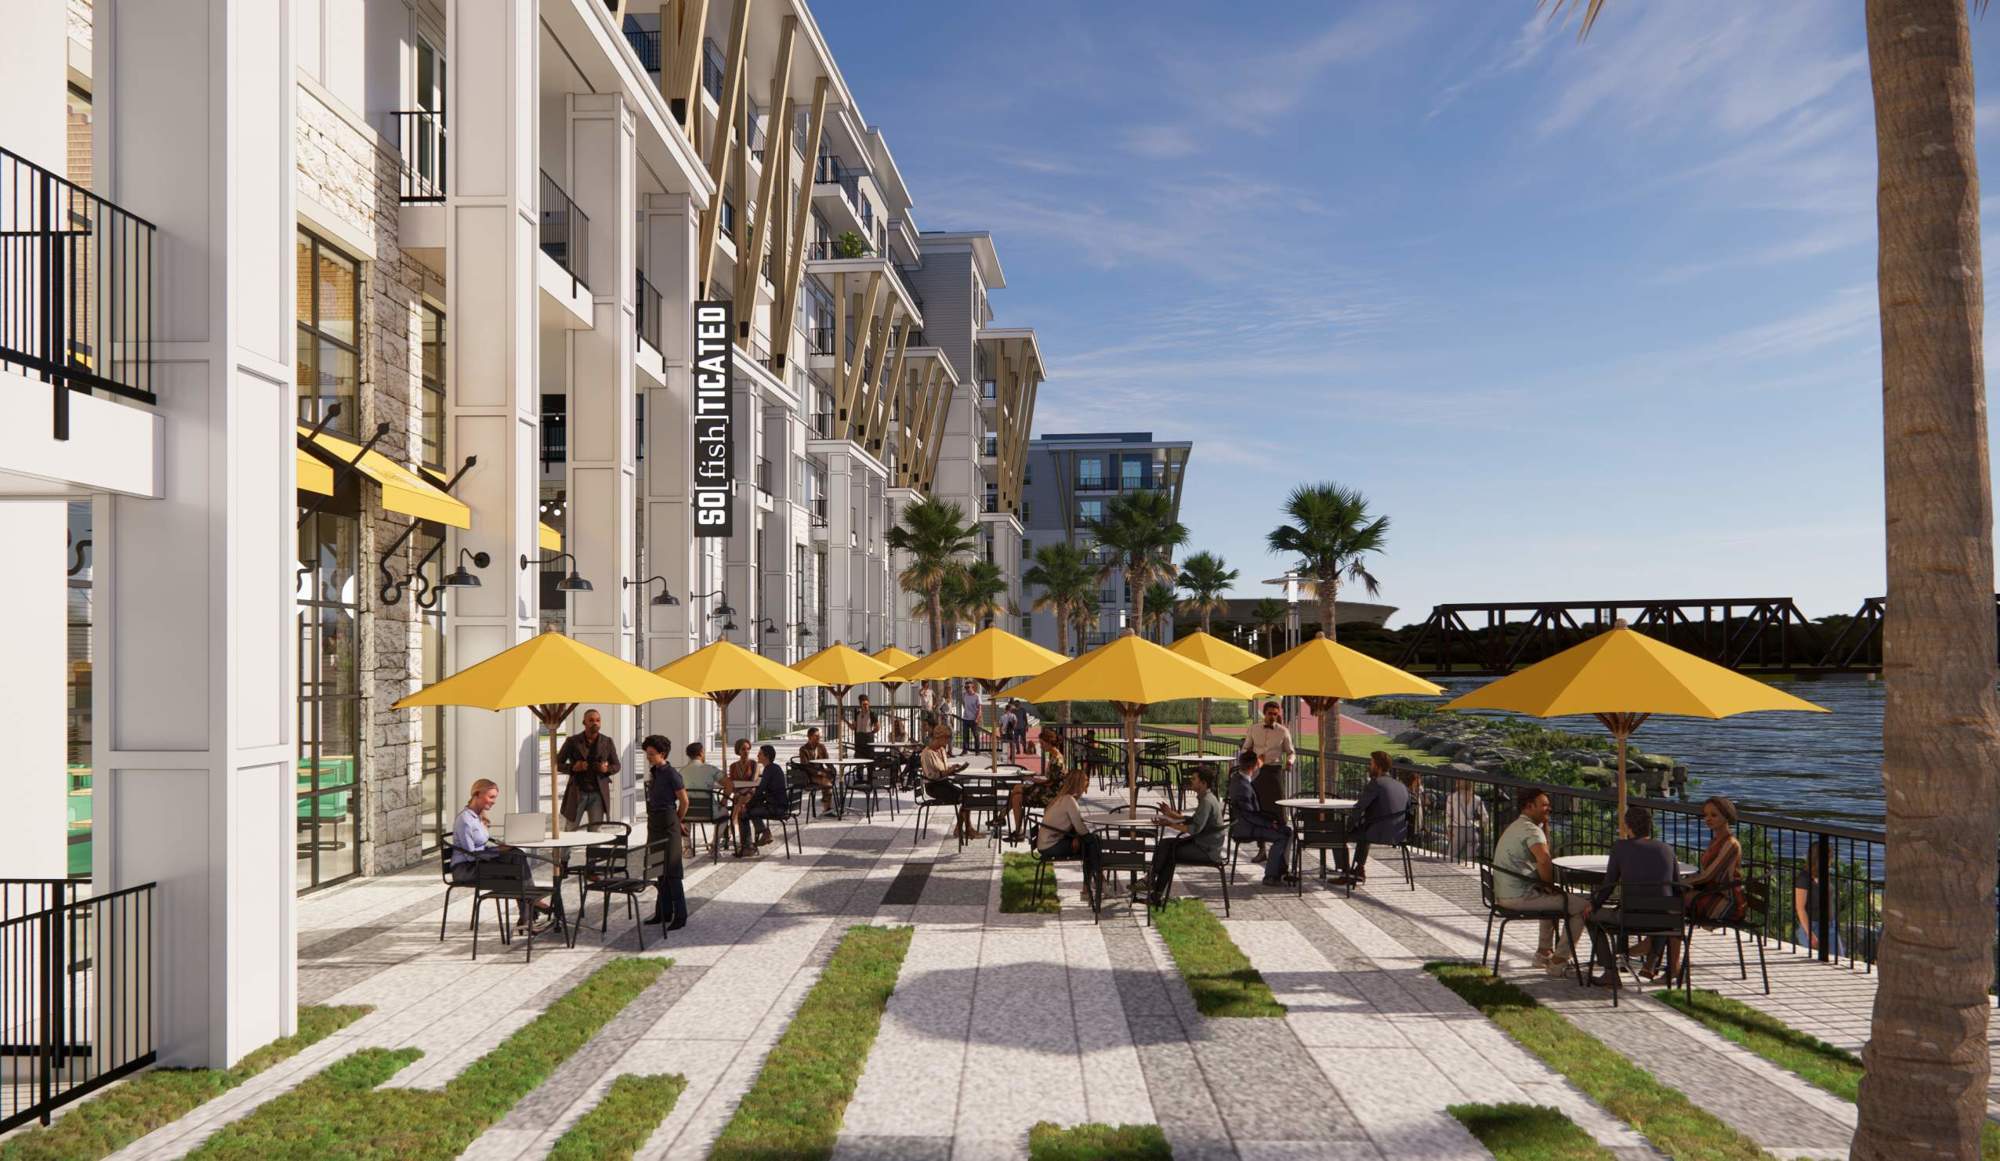 The restaurant planned at One Riverside.